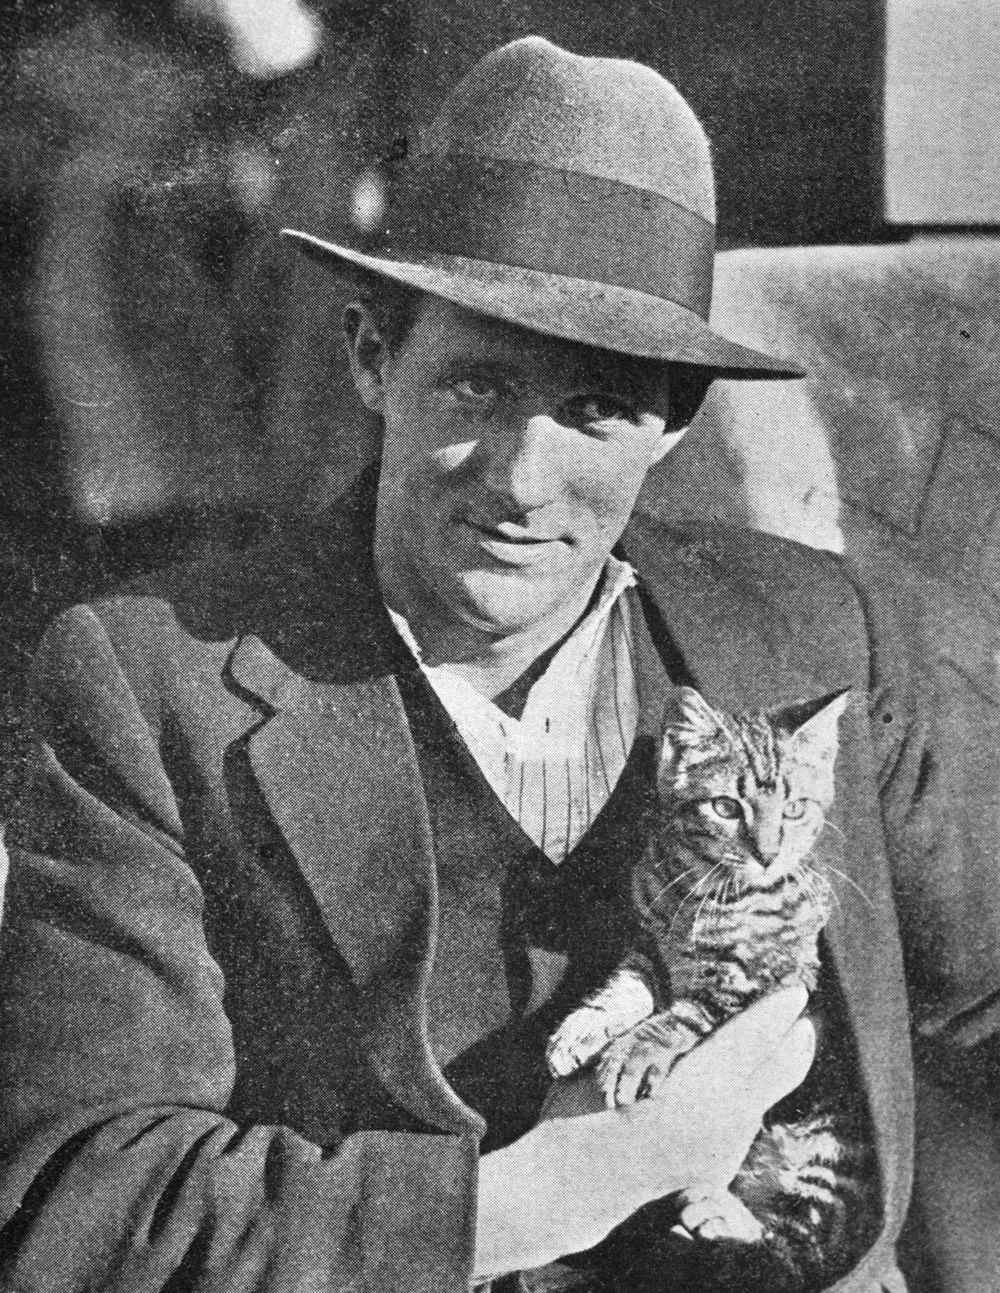 Seaman Kehoe and the Wiltshire's cat